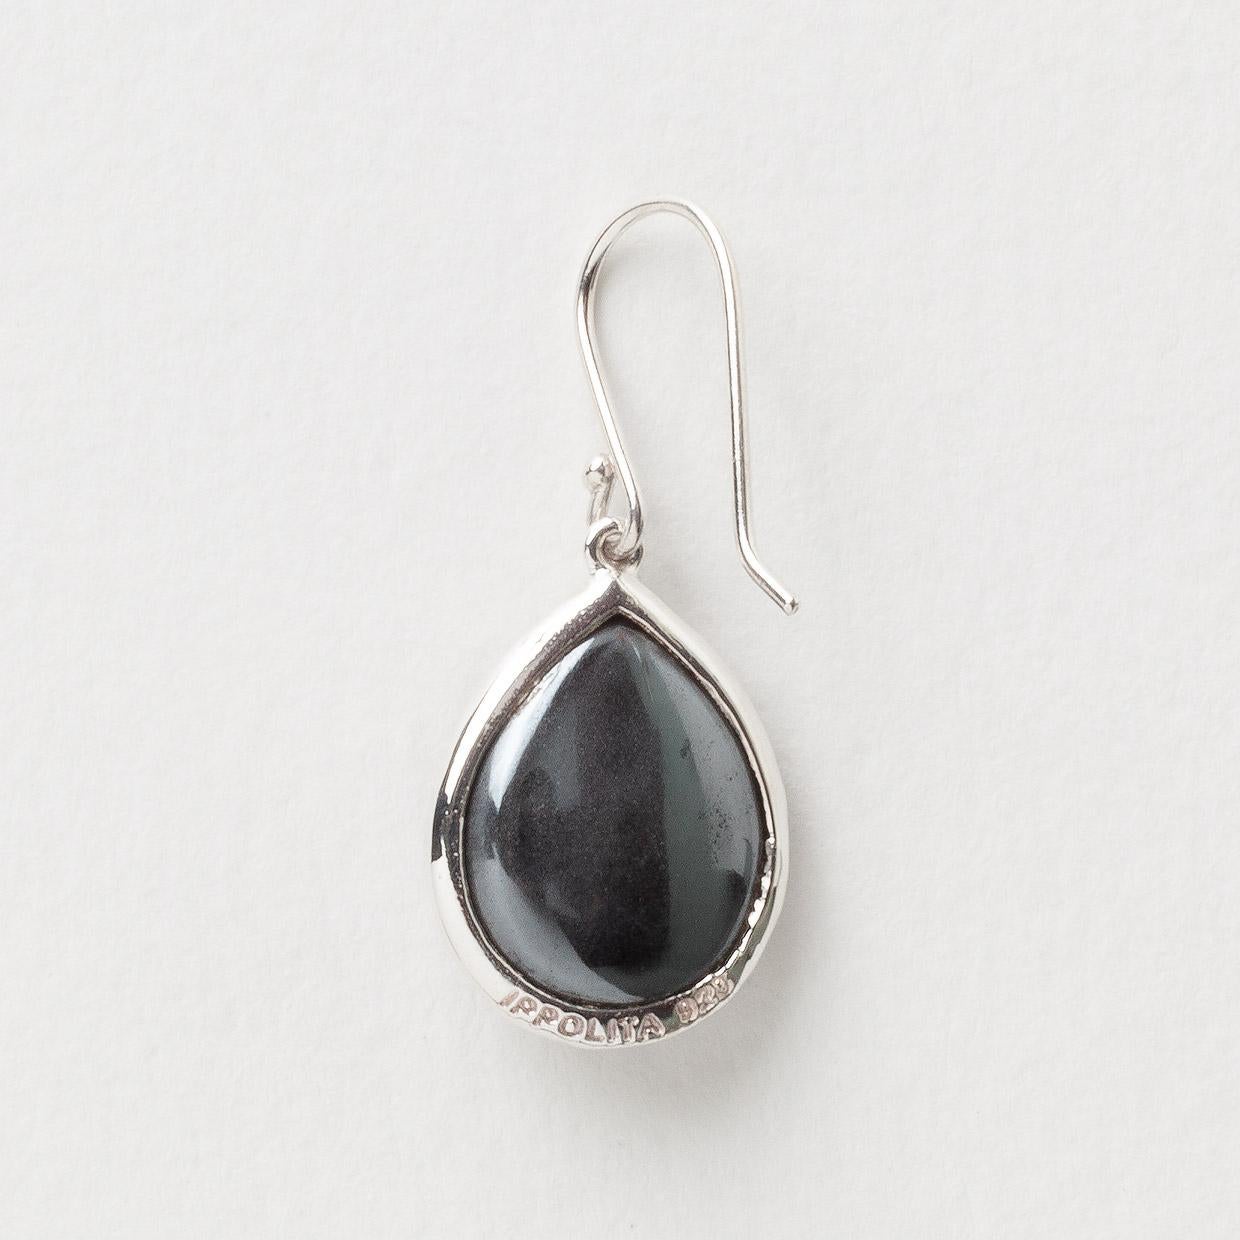 Product Details:
Main Stone Shape: Pear
Main Stone Treatment: Not Enhanced
Main Stone Creation: Natural
Main Stone: Hematite
Main Stone Color: Black
Estimated Retail:  $395.00
Condition: Pre Owned
Brand: Ippolita
Collection: Rock Candy
Metal: